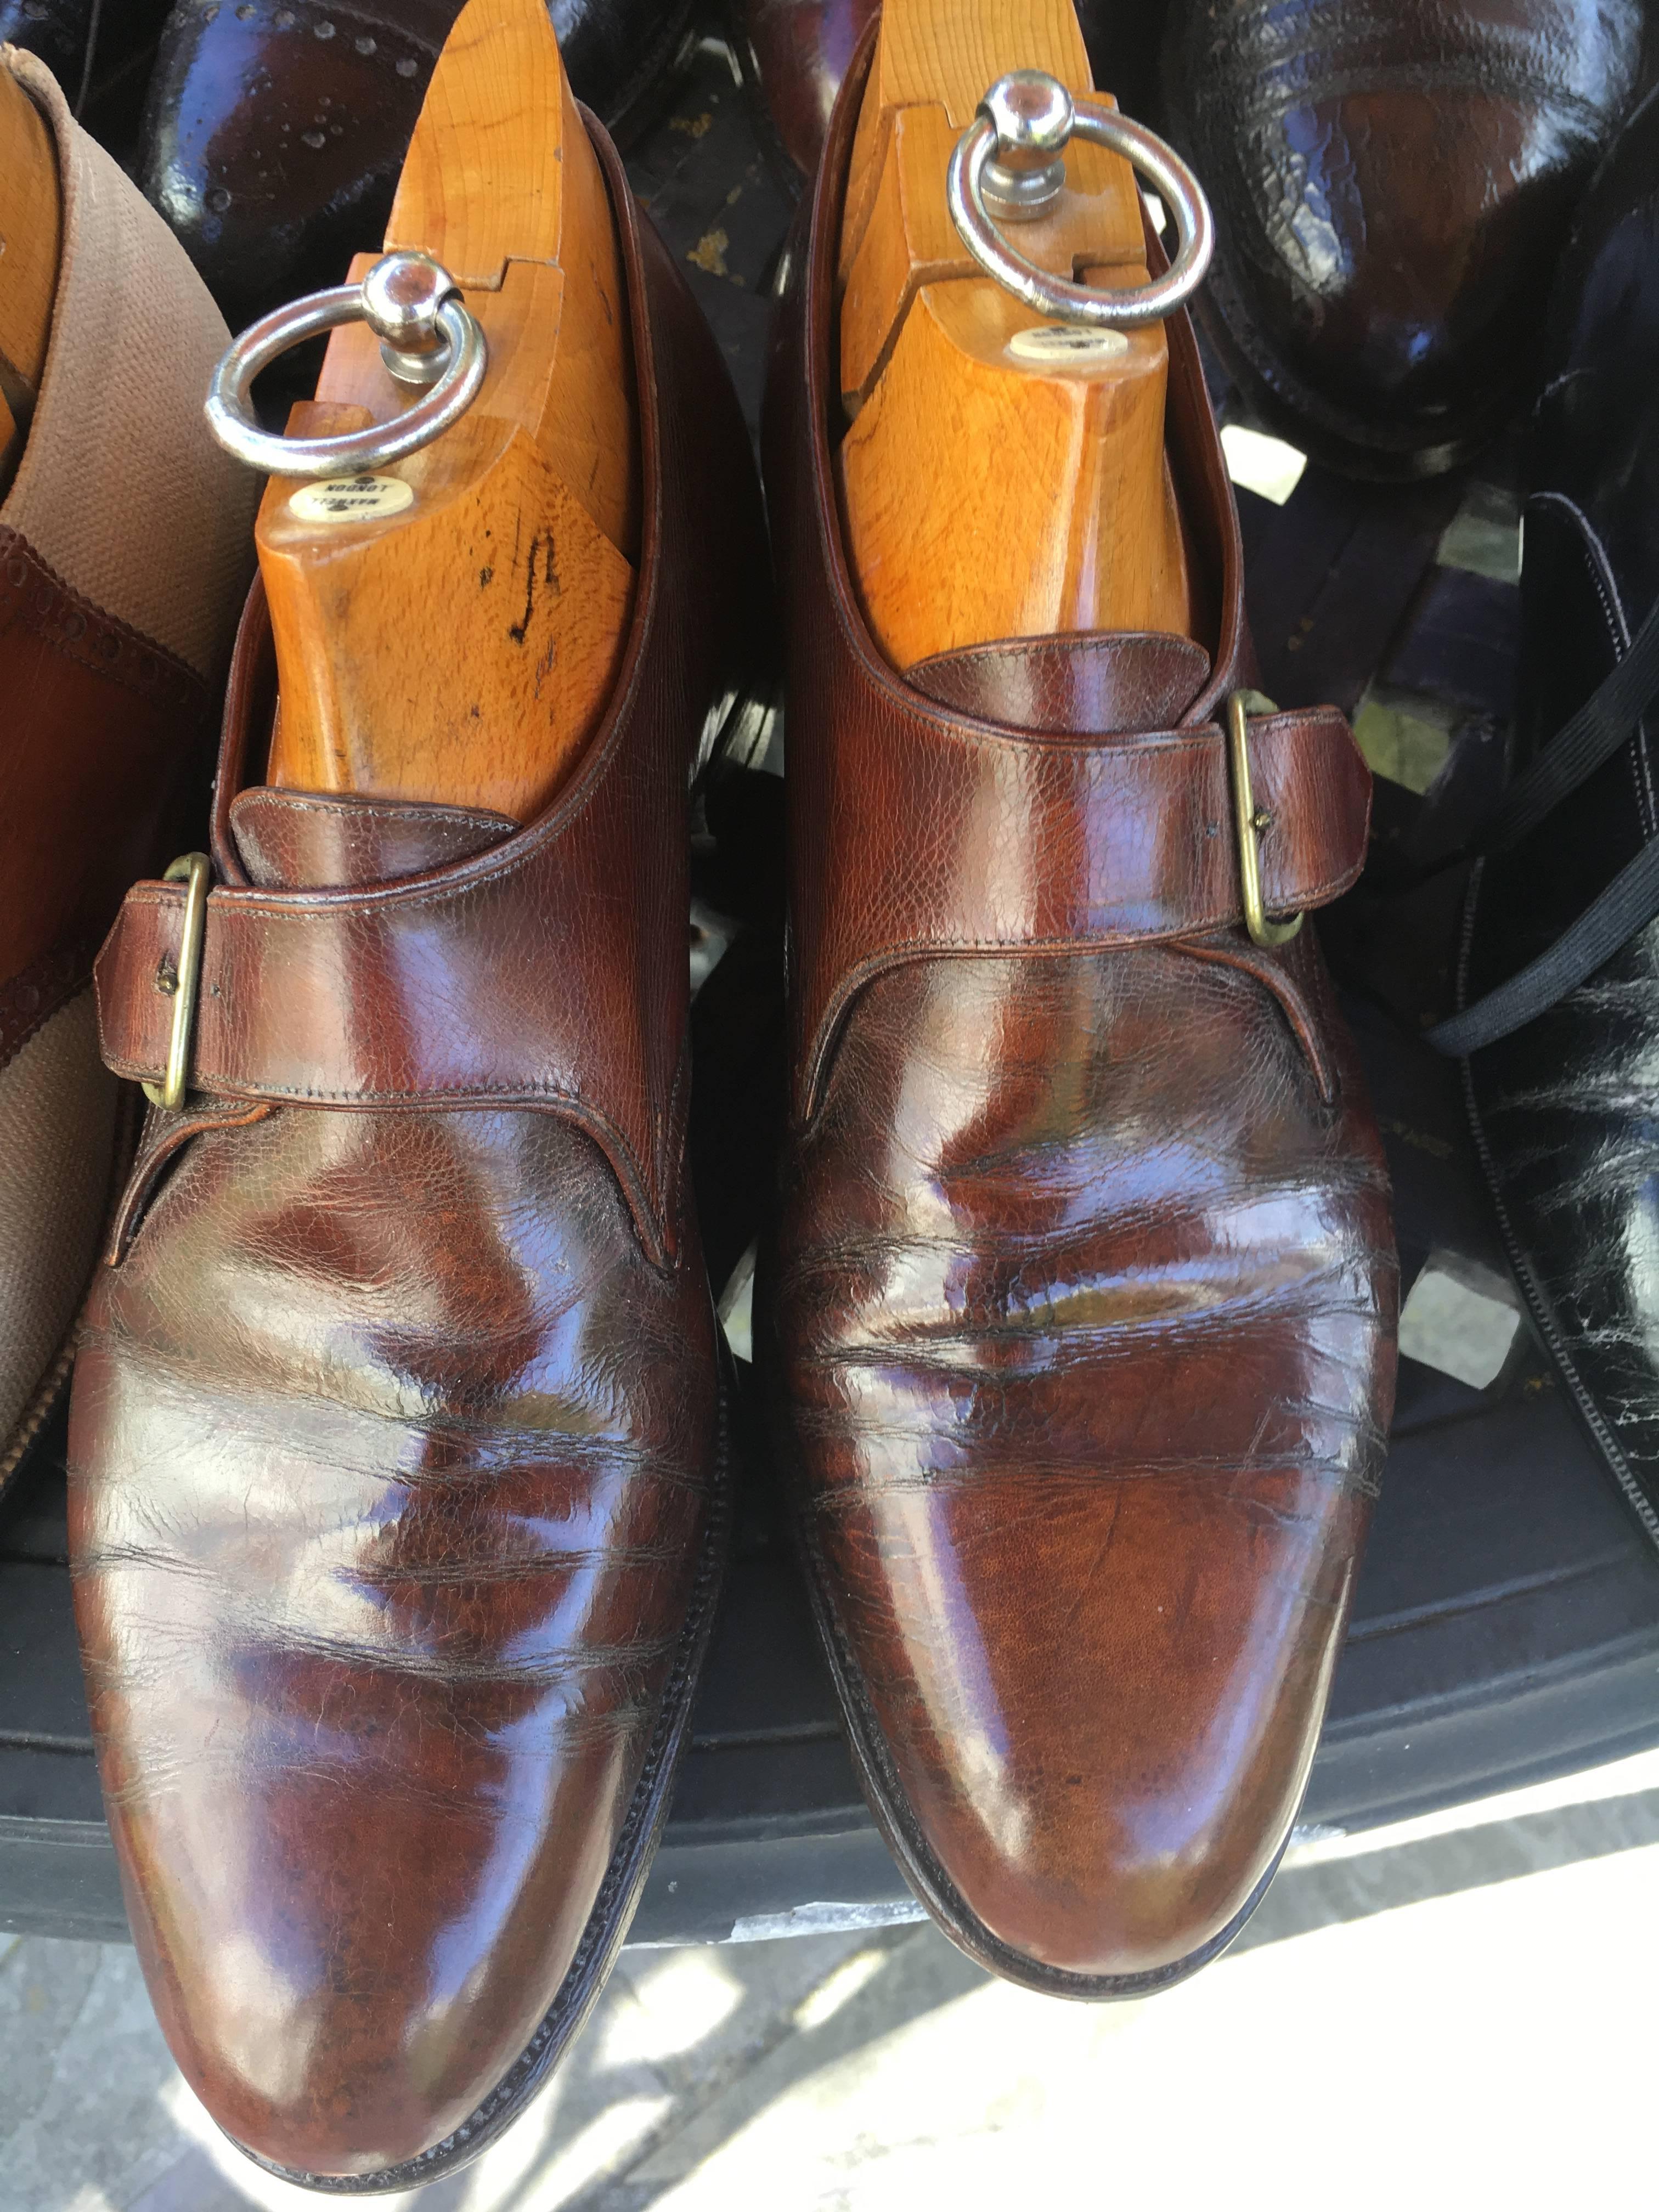 Maxwell London 12 Pair of Pre War Bespoke Gentleman's Shoes w Shoe Trees In Good Condition For Sale In Cloverdale, CA